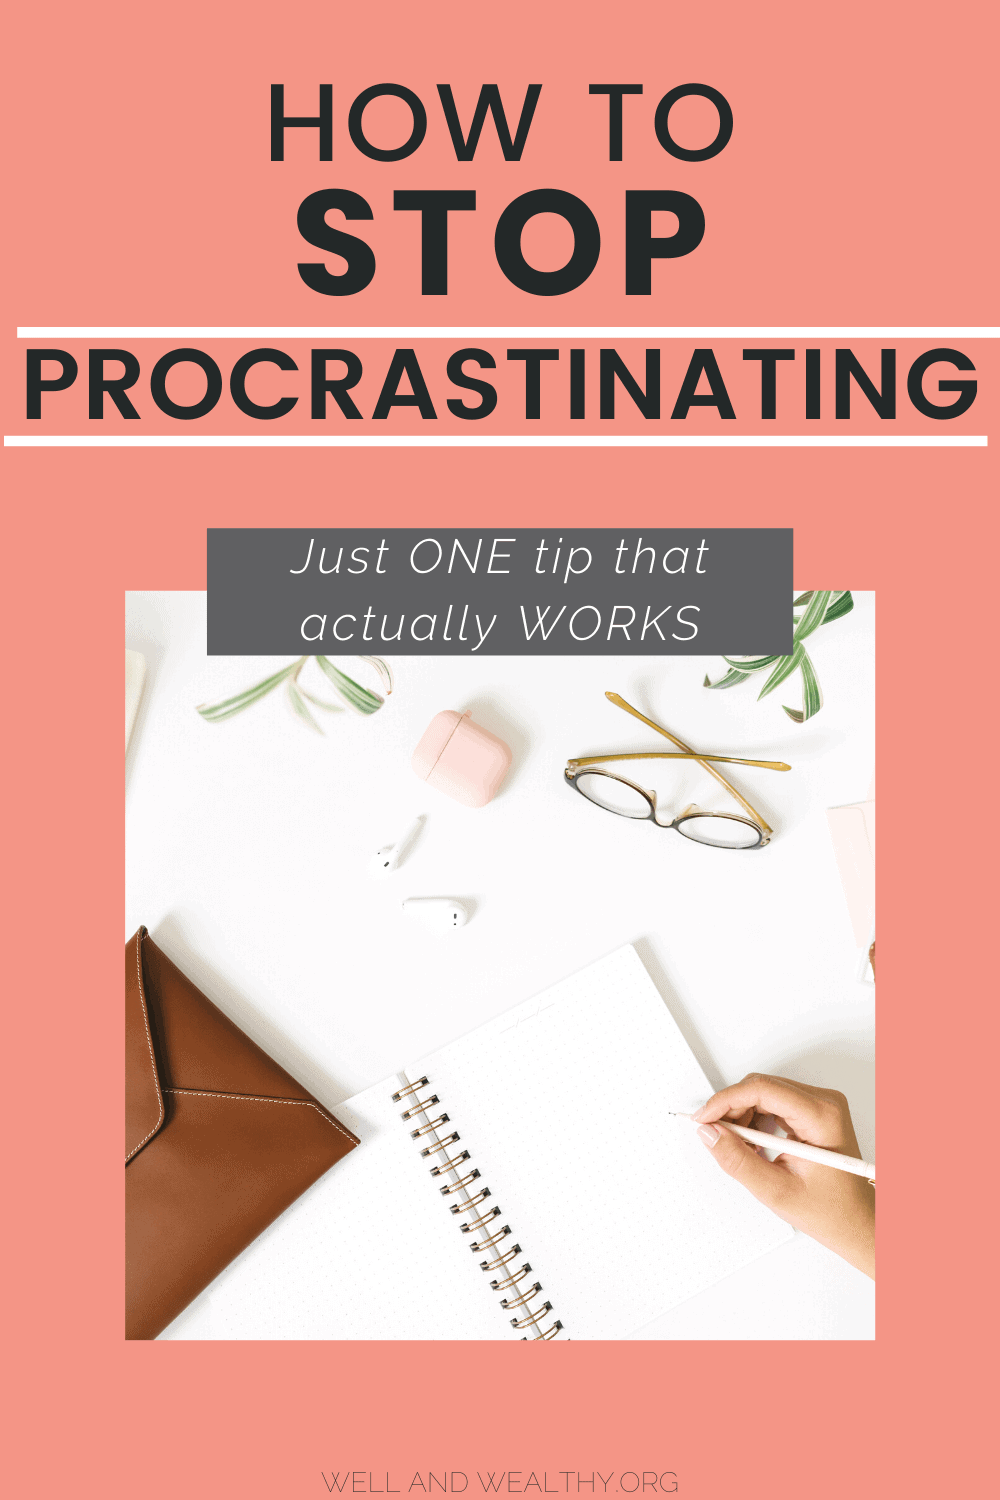 Need to know how to stop procrastinating? Want how to stop procrastinating tips time management and how to stop procrastinating tips productivity? Or maybe you need to know how to stop wasting time tips or how to stop procrastinating life! This post will finally answer the questions of how to stop procrastinating get started, how to stop procrastinating motivation productivity and how to stop procrastinating the rules! So if you're looking to improve productivity, time management tips, motivation to get things done and stop procrastinating then this post is for you! #timemanagementtips #productivity #stopprocrastinating